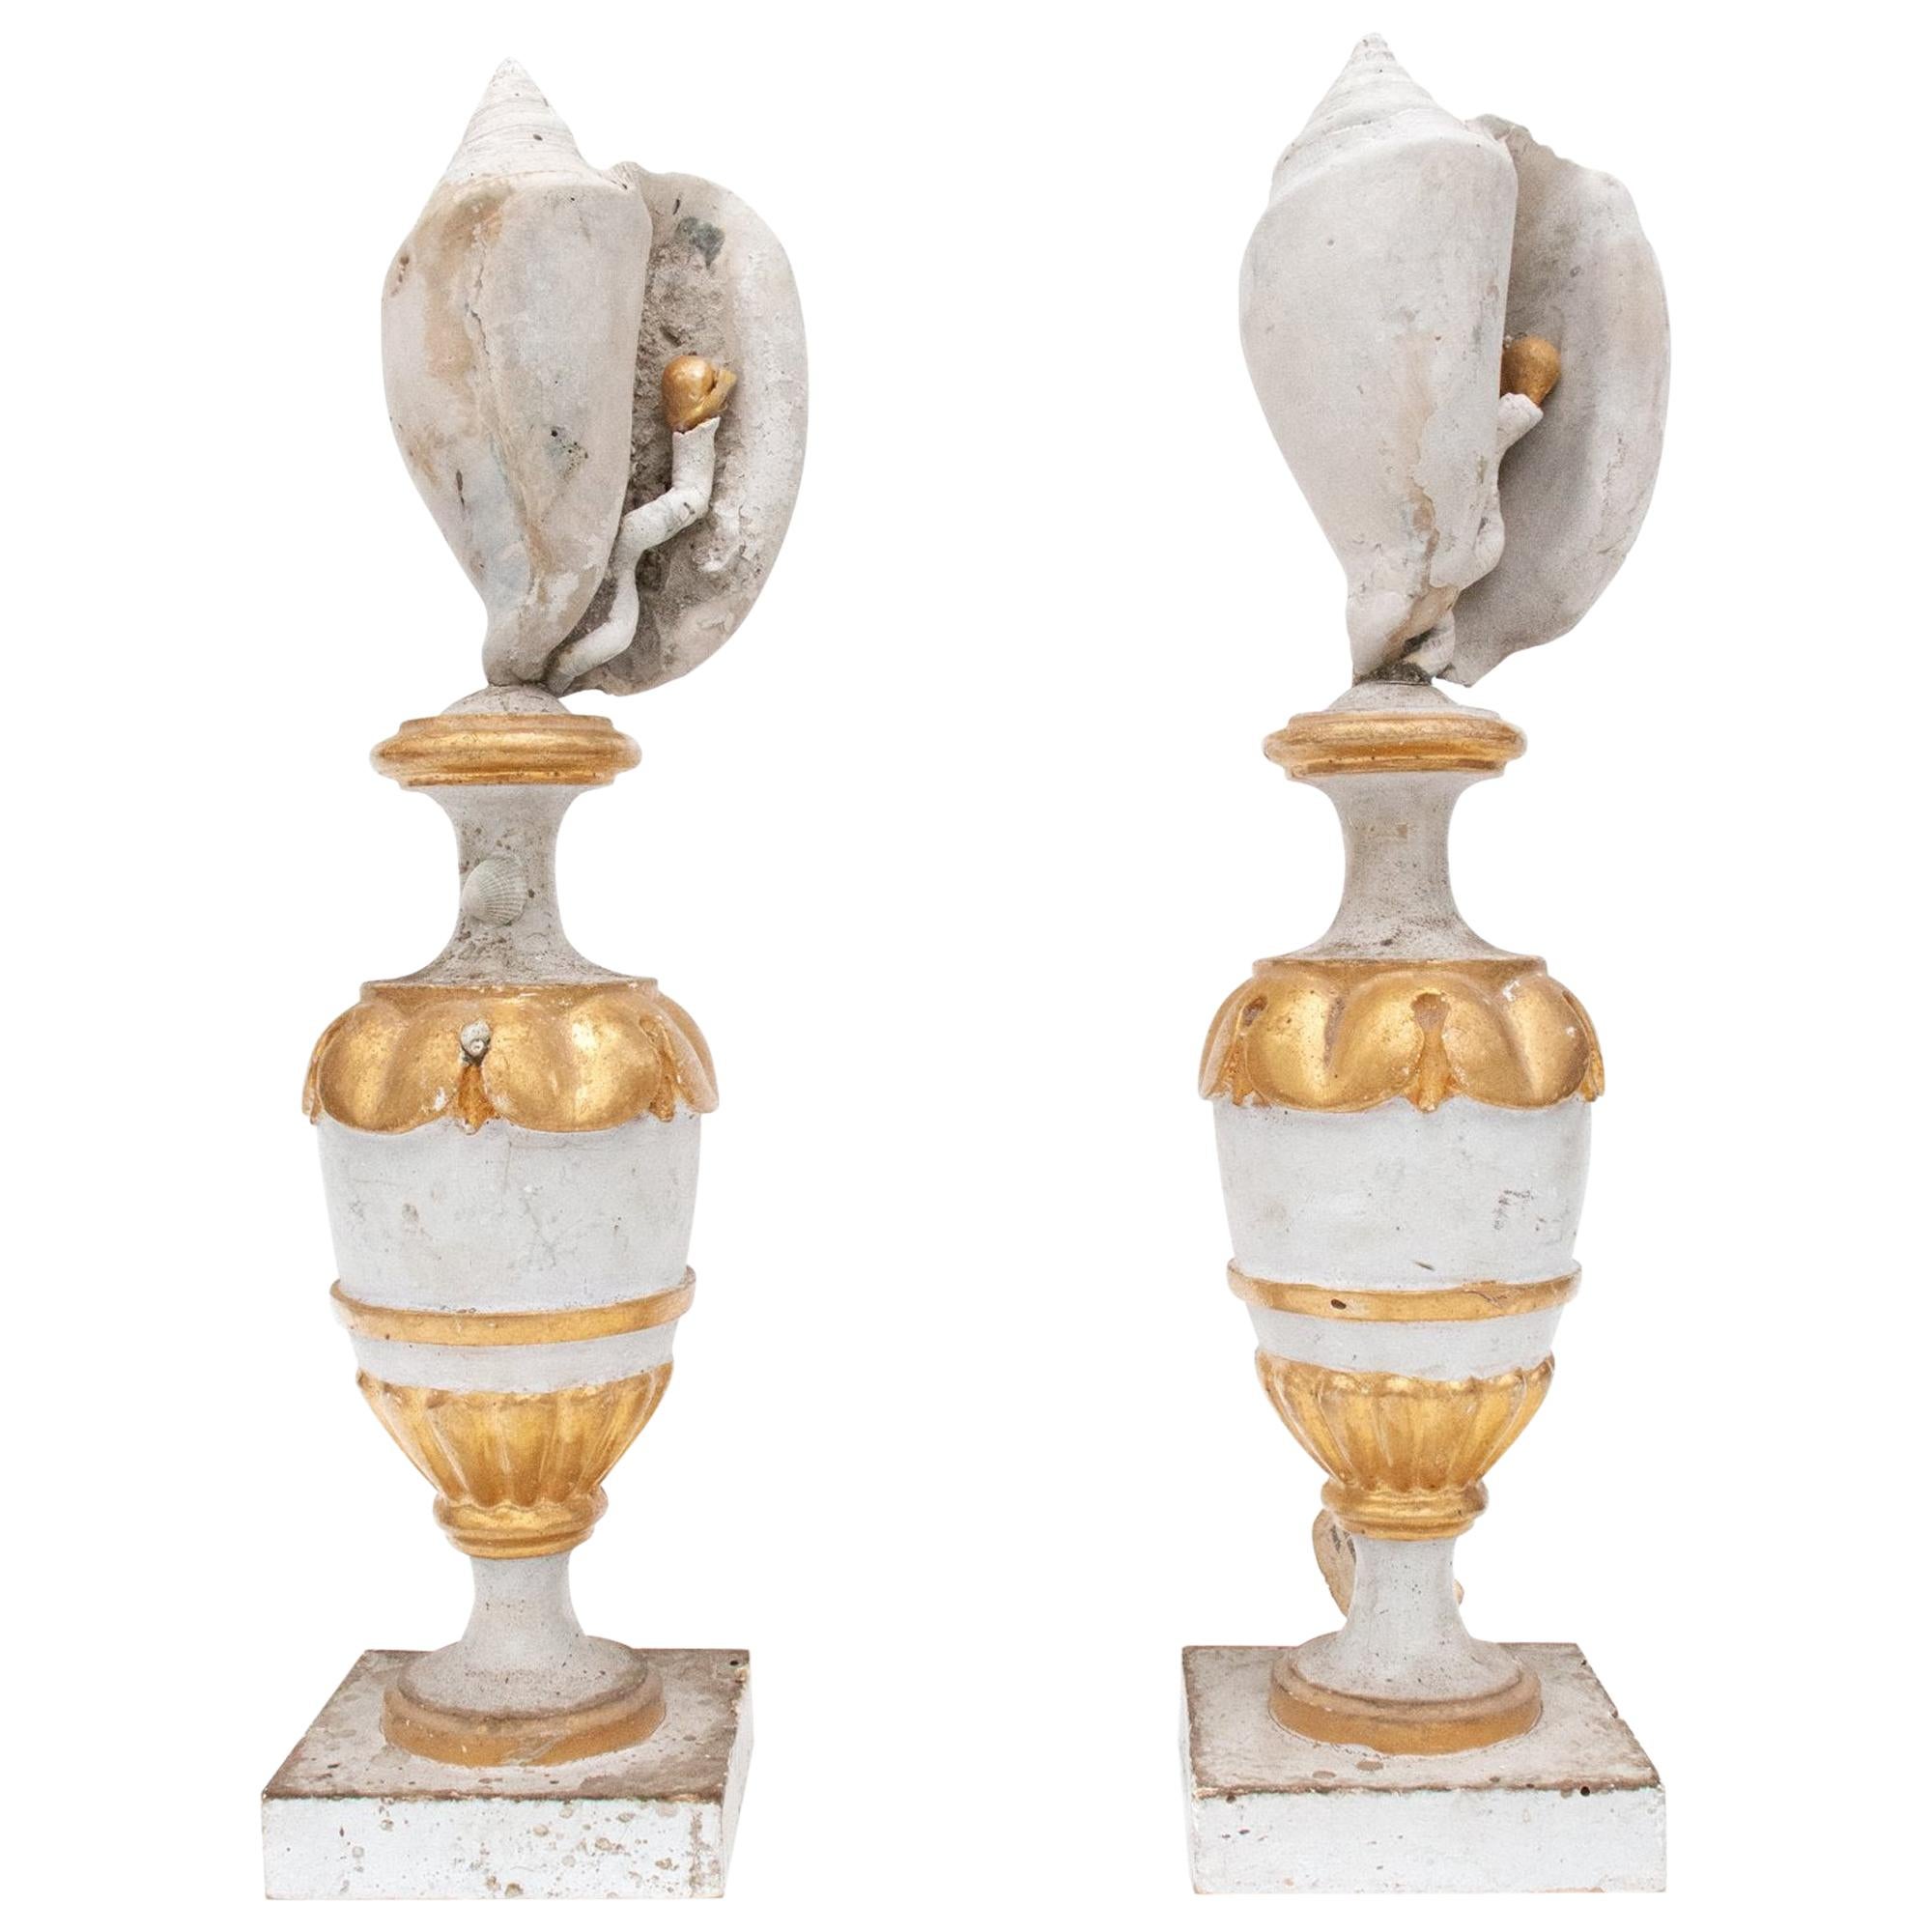 Pair of 18th Century Italian Vases Decorated with Shells and Baroque Pearls